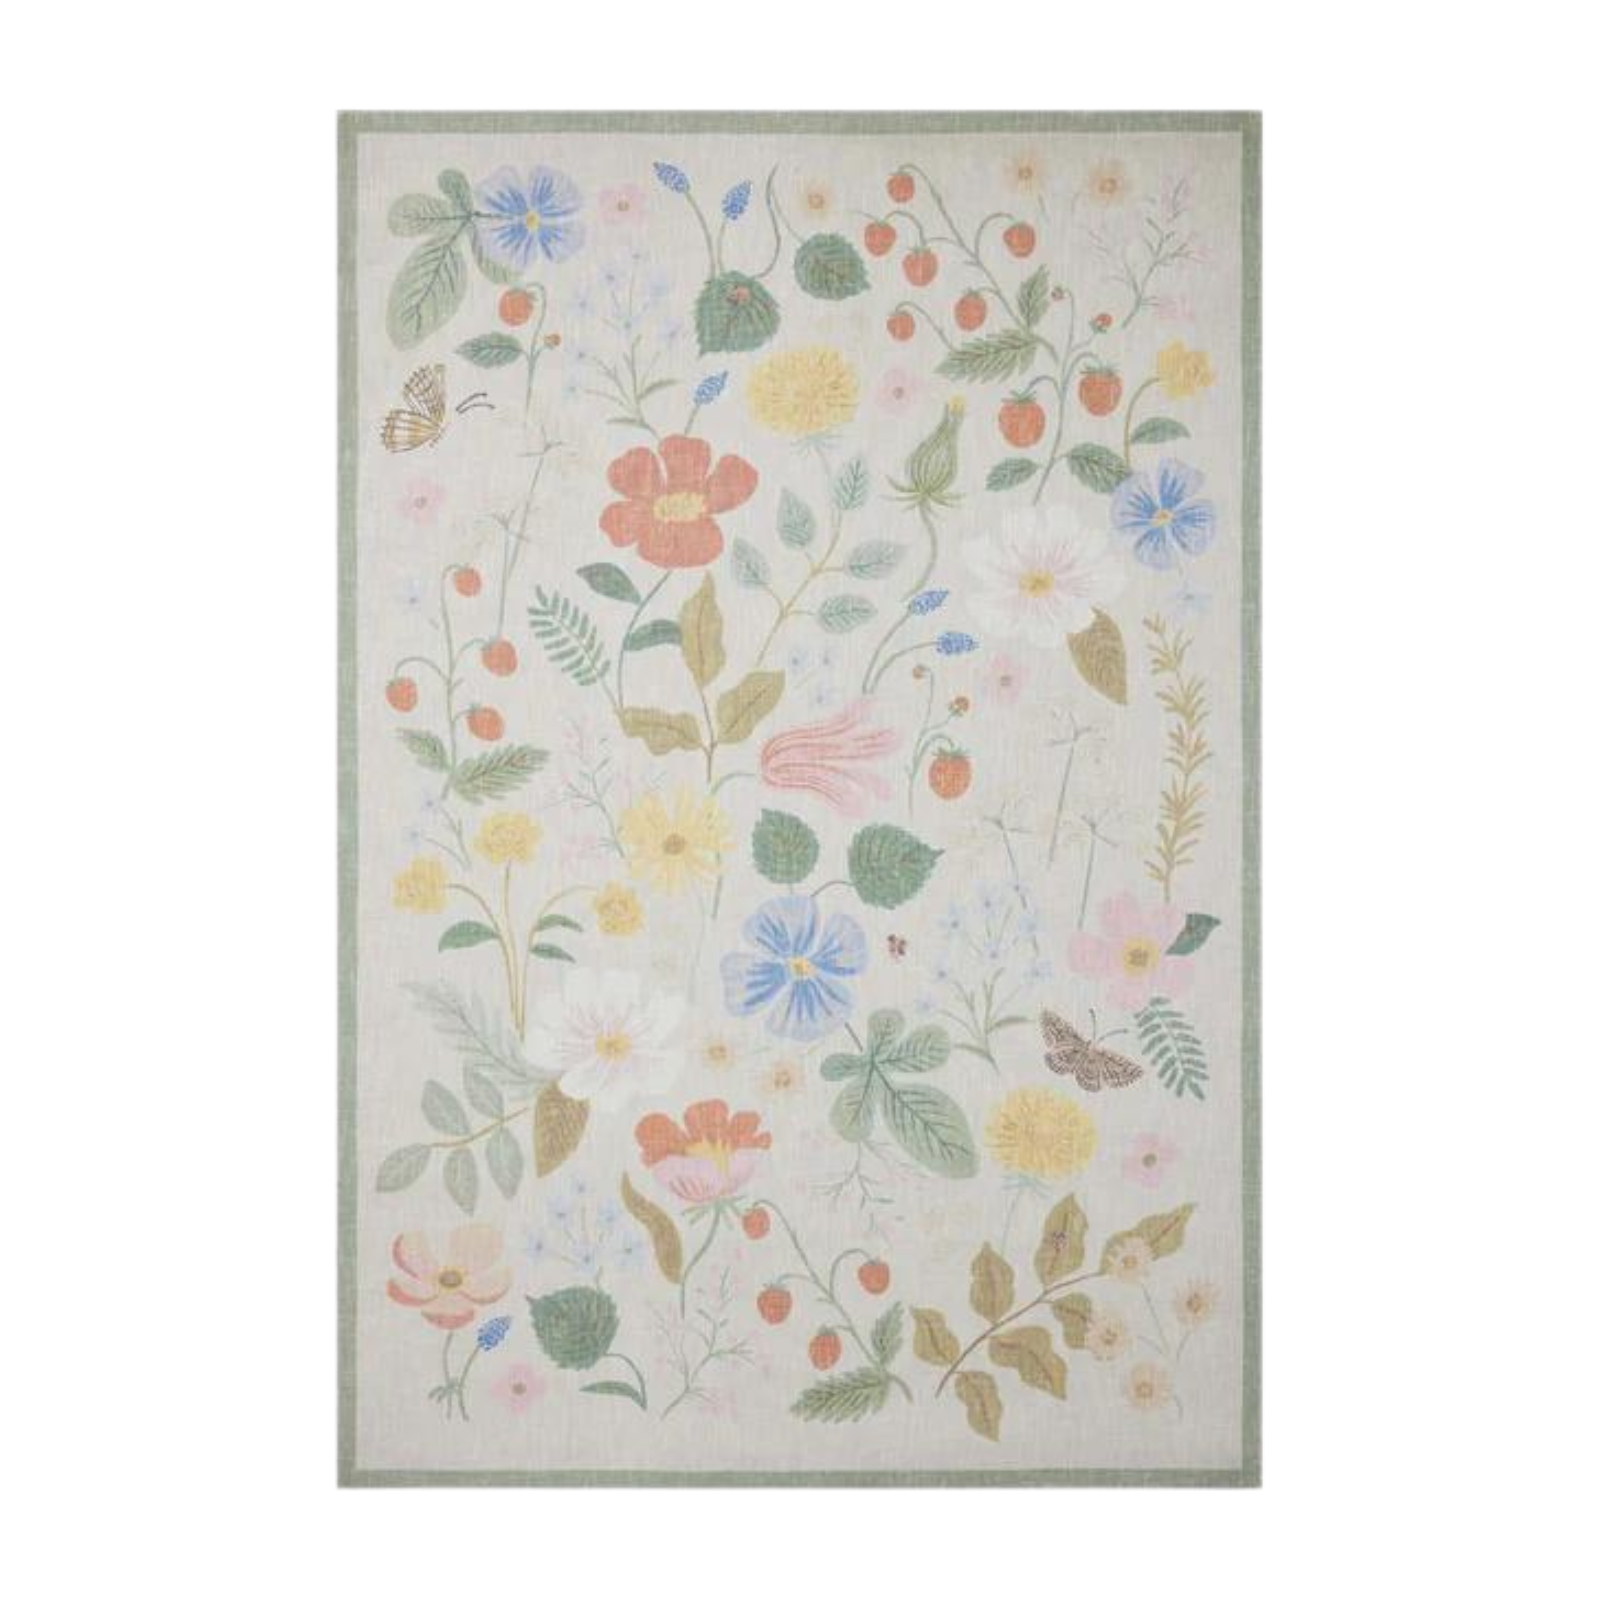 OVERSTOCK RUG - Loloi Cotswolds Strawberry Fields Ivory Rug - 2'3" x 3'9"